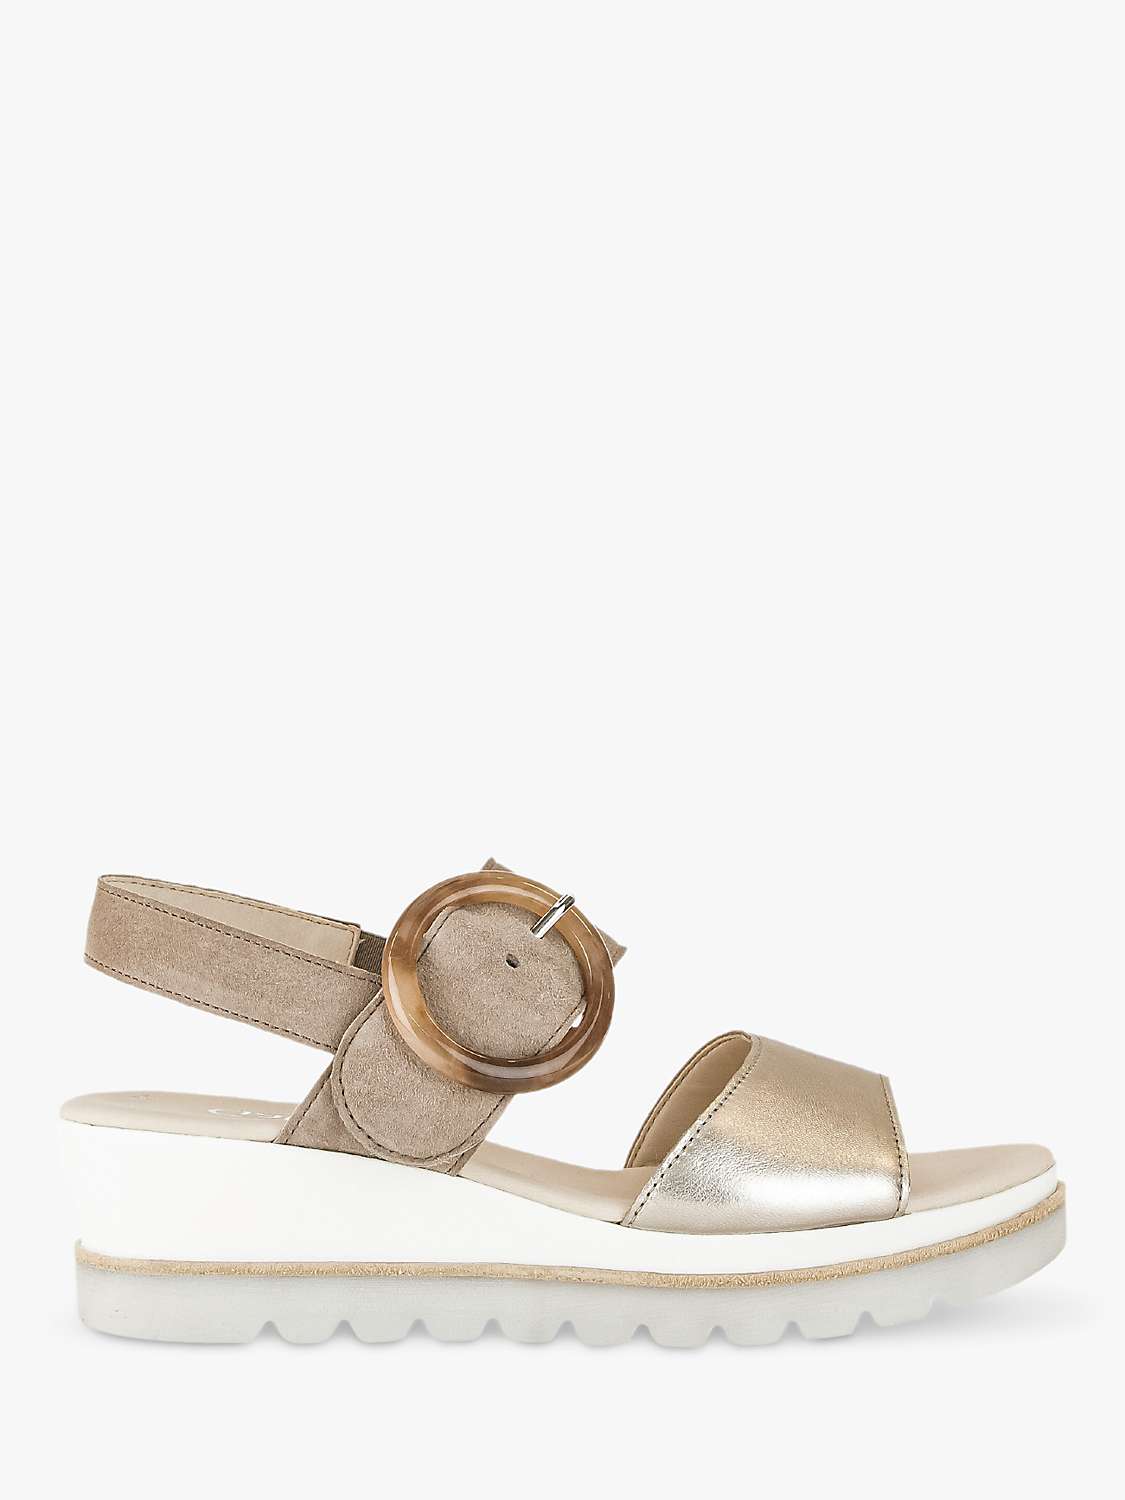 Gabor Yeo Leather Wedge Sandals, Puder/Rabbit at John Lewis & Partners